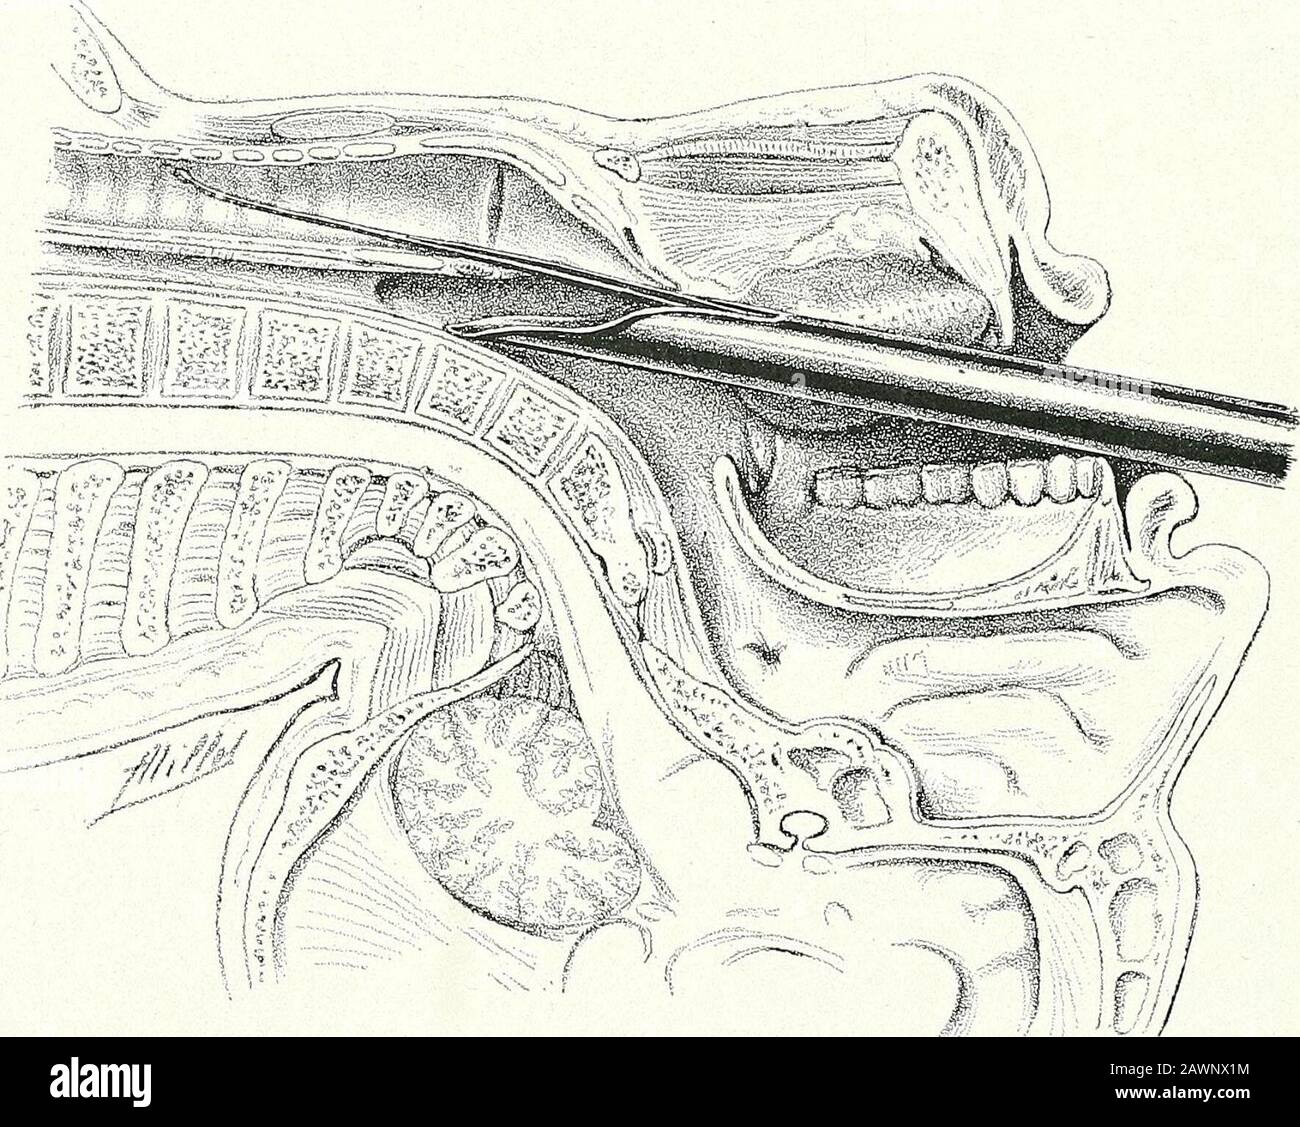 Surgical therapeutics and operative technique . Fig. 355.—Direct Laryngoscopy by the Authors Method: Introduction ofTHE Pharyngeal Tube furnished with Mandril.. Fig. 356.—Introduction of Intralaryngeal Conductor by the AnteriorCleft of the Pharyngeal Tube. OPERATIONS ON THE NECK 217 of the trachea and bronchi. Special forceps, the jaws of which are controlledtlirough a long stem, enable us to reach foreign bodies, which are easilyextracted by this technique. Stock Photo